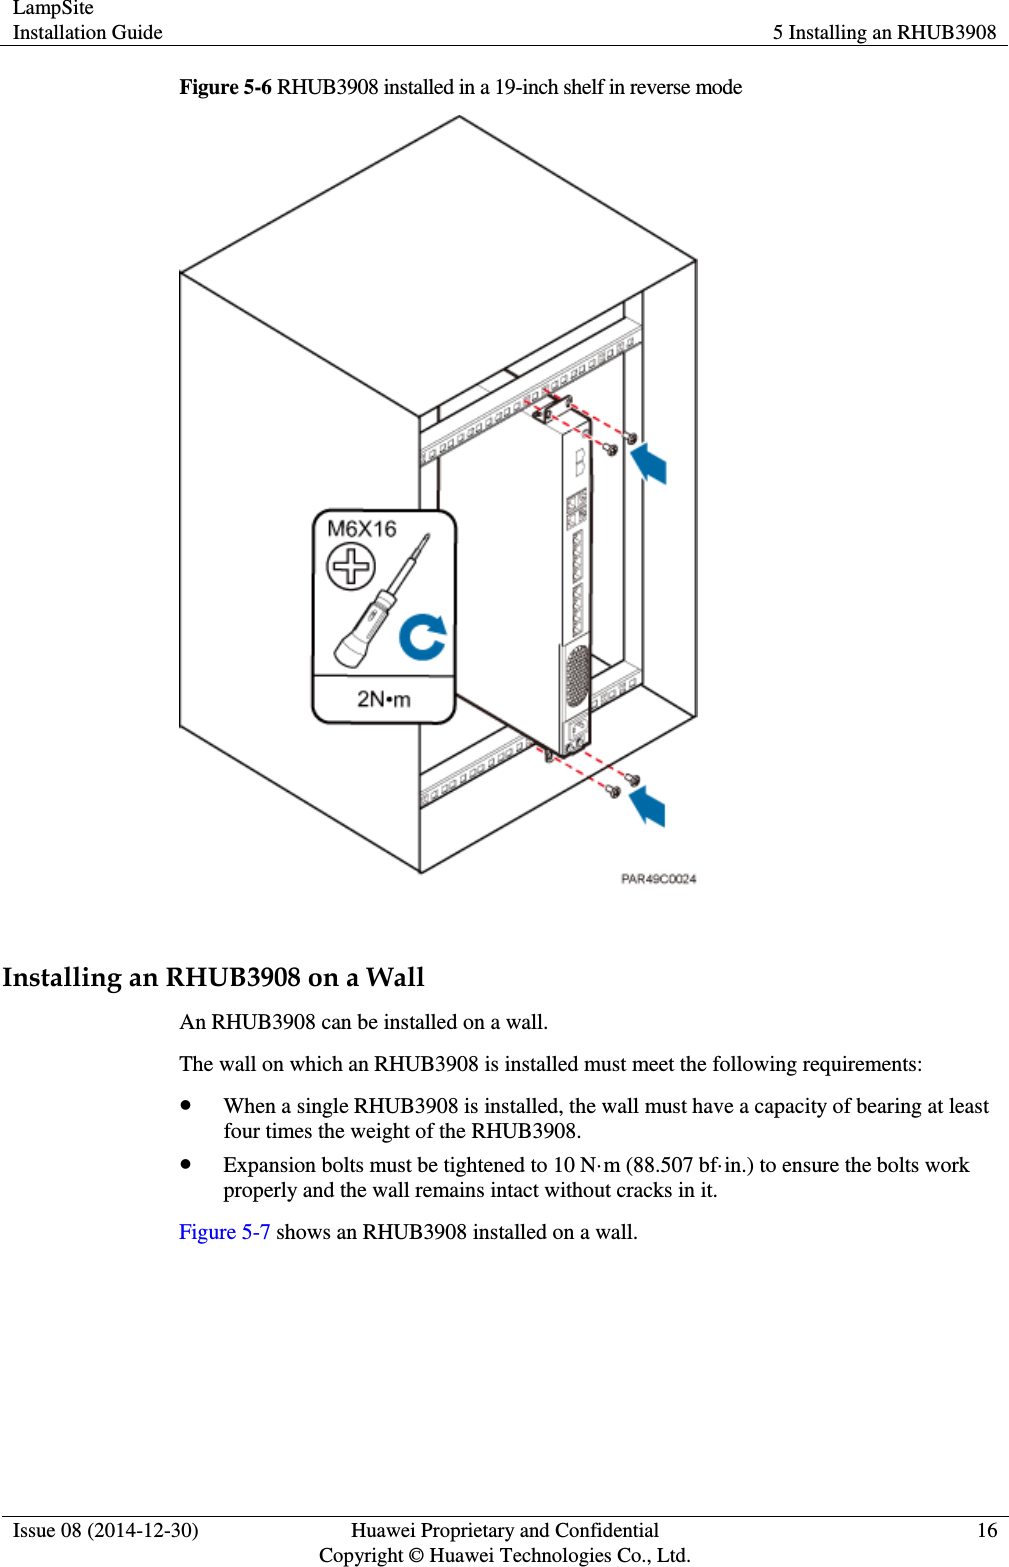 LampSite Installation Guide 5 Installing an RHUB3908  Issue 08 (2014-12-30) Huawei Proprietary and Confidential                                     Copyright © Huawei Technologies Co., Ltd. 16  Figure 5-6 RHUB3908 installed in a 19-inch shelf in reverse mode   Installing an RHUB3908 on a Wall An RHUB3908 can be installed on a wall. The wall on which an RHUB3908 is installed must meet the following requirements:  When a single RHUB3908 is installed, the wall must have a capacity of bearing at least four times the weight of the RHUB3908.  Expansion bolts must be tightened to 10 N·m (88.507 bf·in.) to ensure the bolts work properly and the wall remains intact without cracks in it. Figure 5-7 shows an RHUB3908 installed on a wall.   